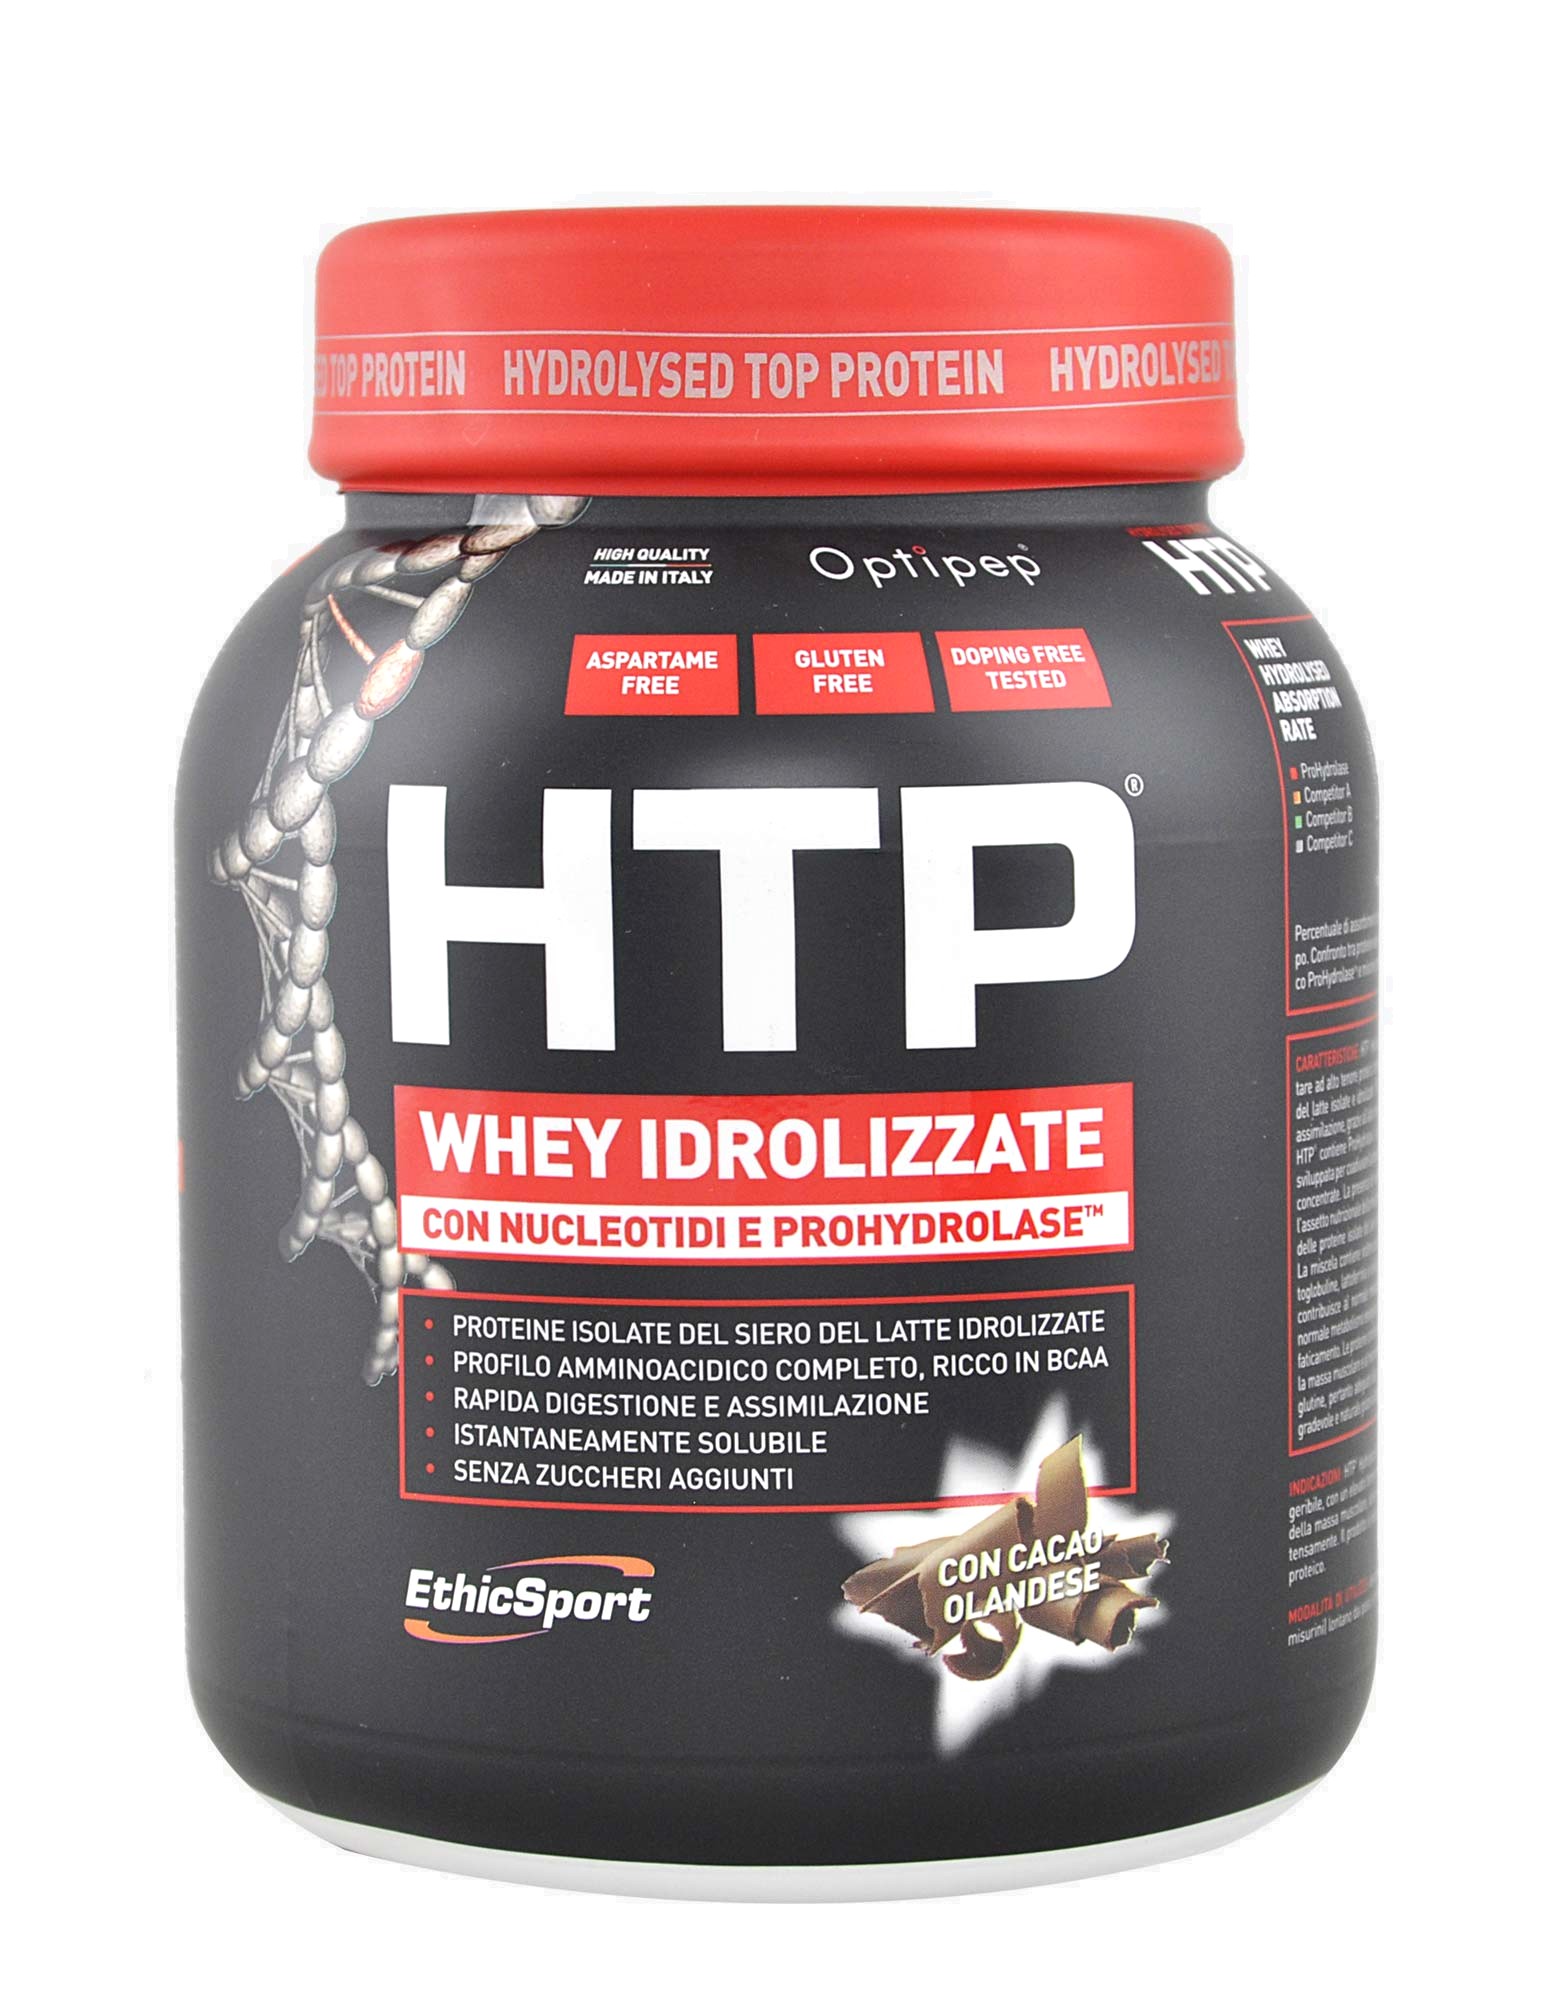 ETHICSPORT HTP HYDROLYSED TOP PROTEIN Cacao - Barattolo 750g.  